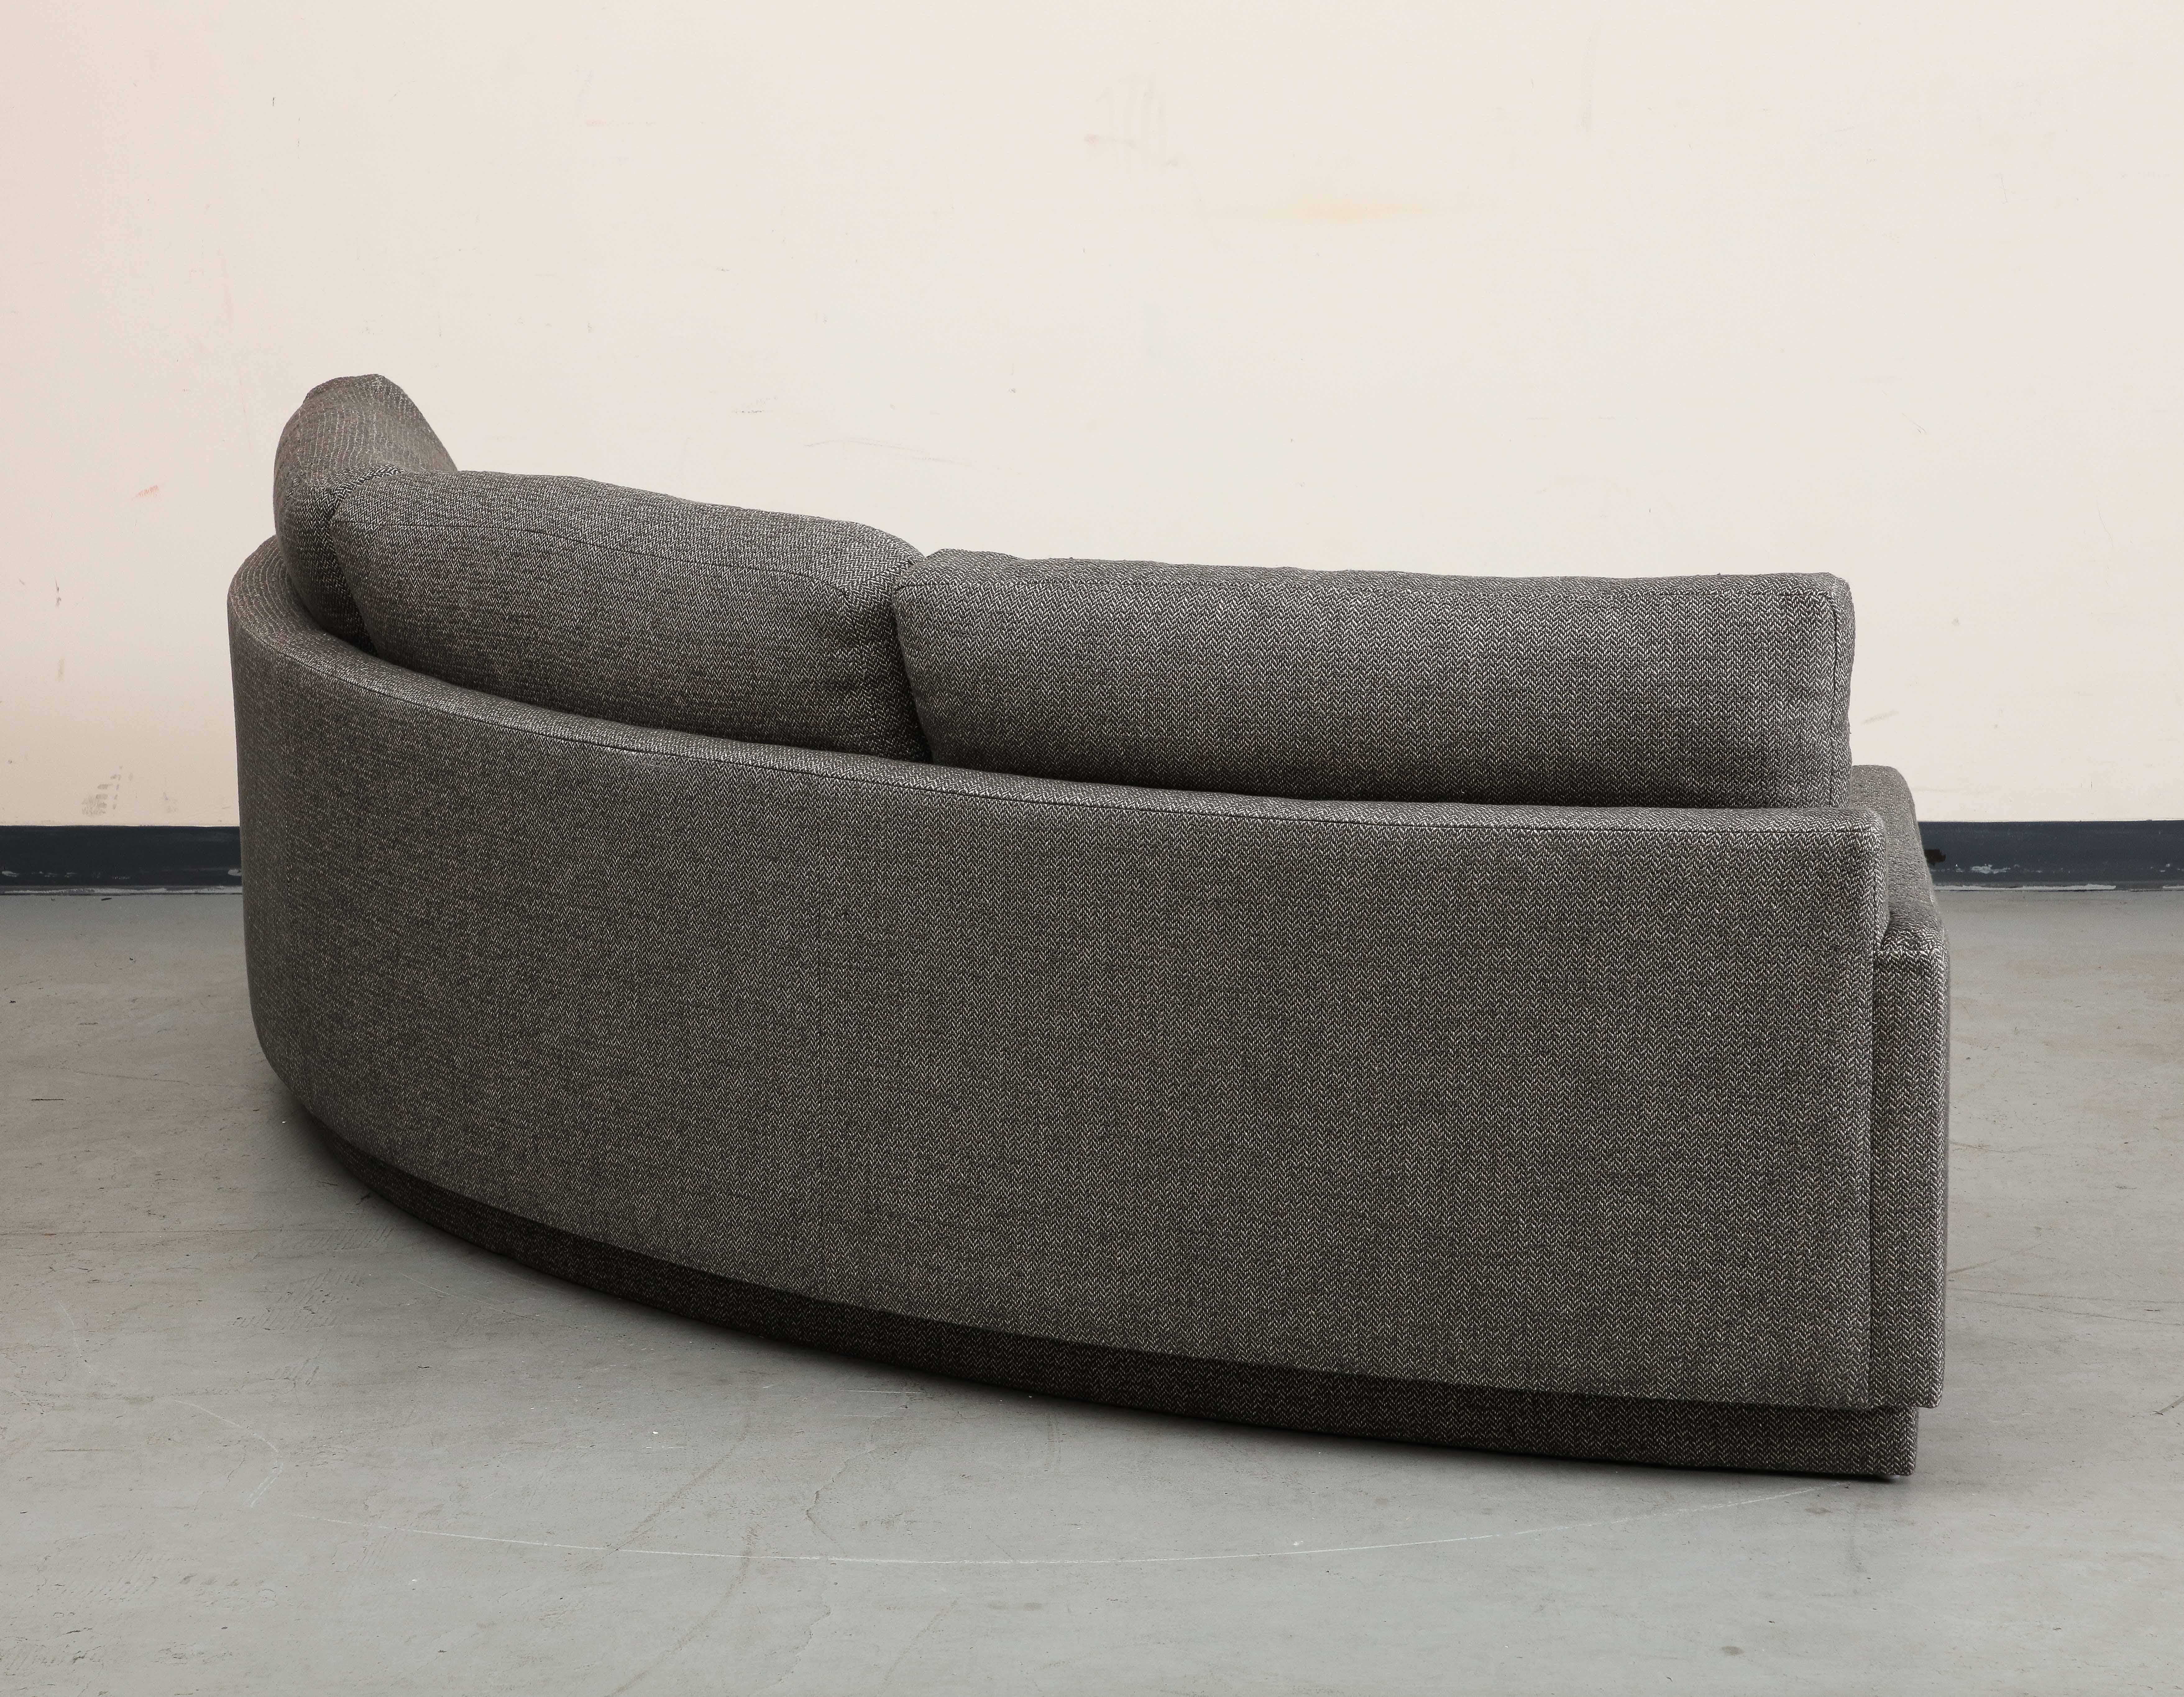 American Milo Baughman Curved Three Seat Sofa, 1970, Newly Upholstered in Cotton Linen For Sale